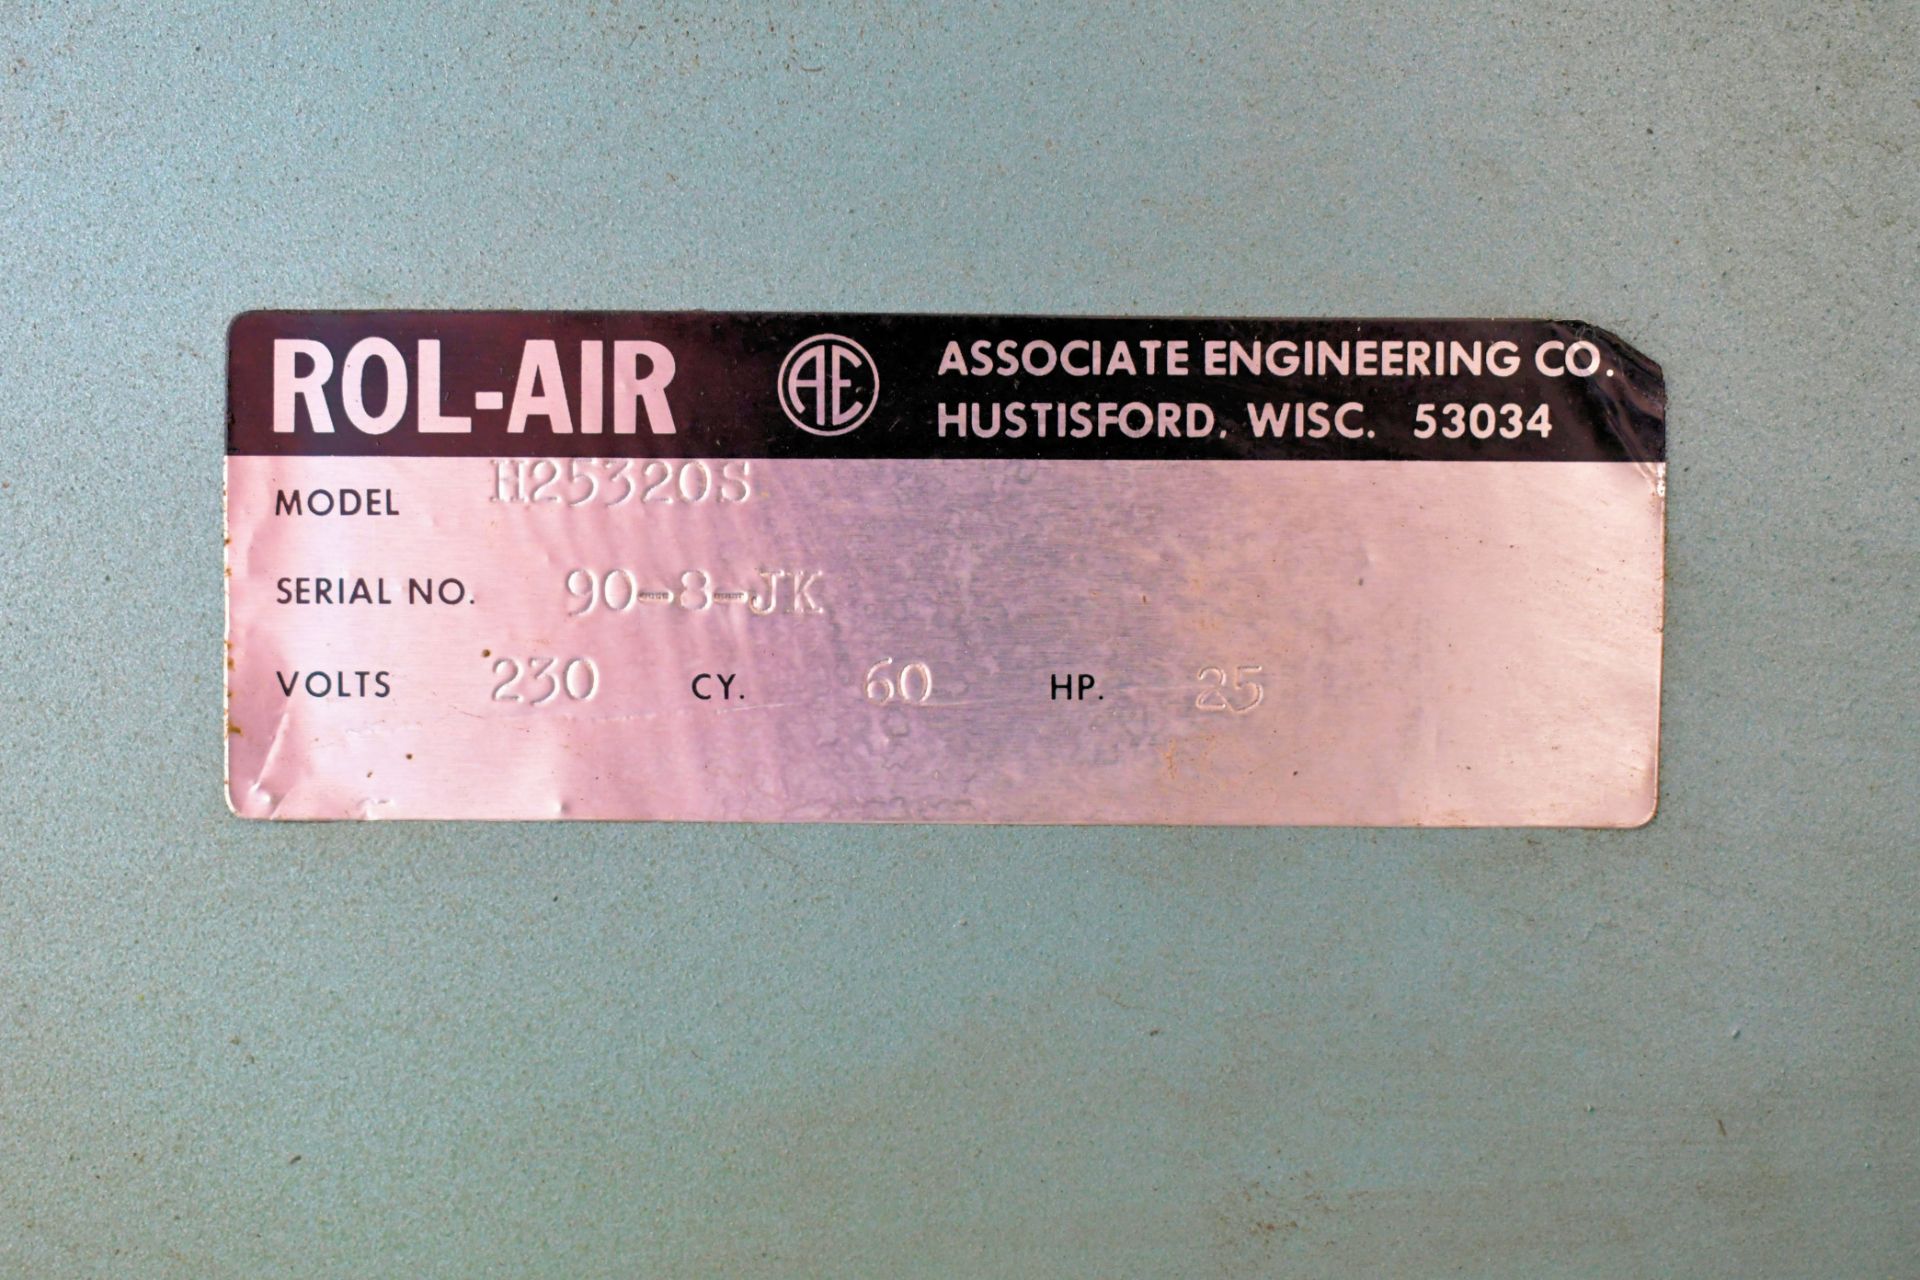 Rol-Air Model H25320S, 25-HP Horizontal Tank Mounted Air Compressor, s/n 90-8-JK, with Drypoint - Image 4 of 5